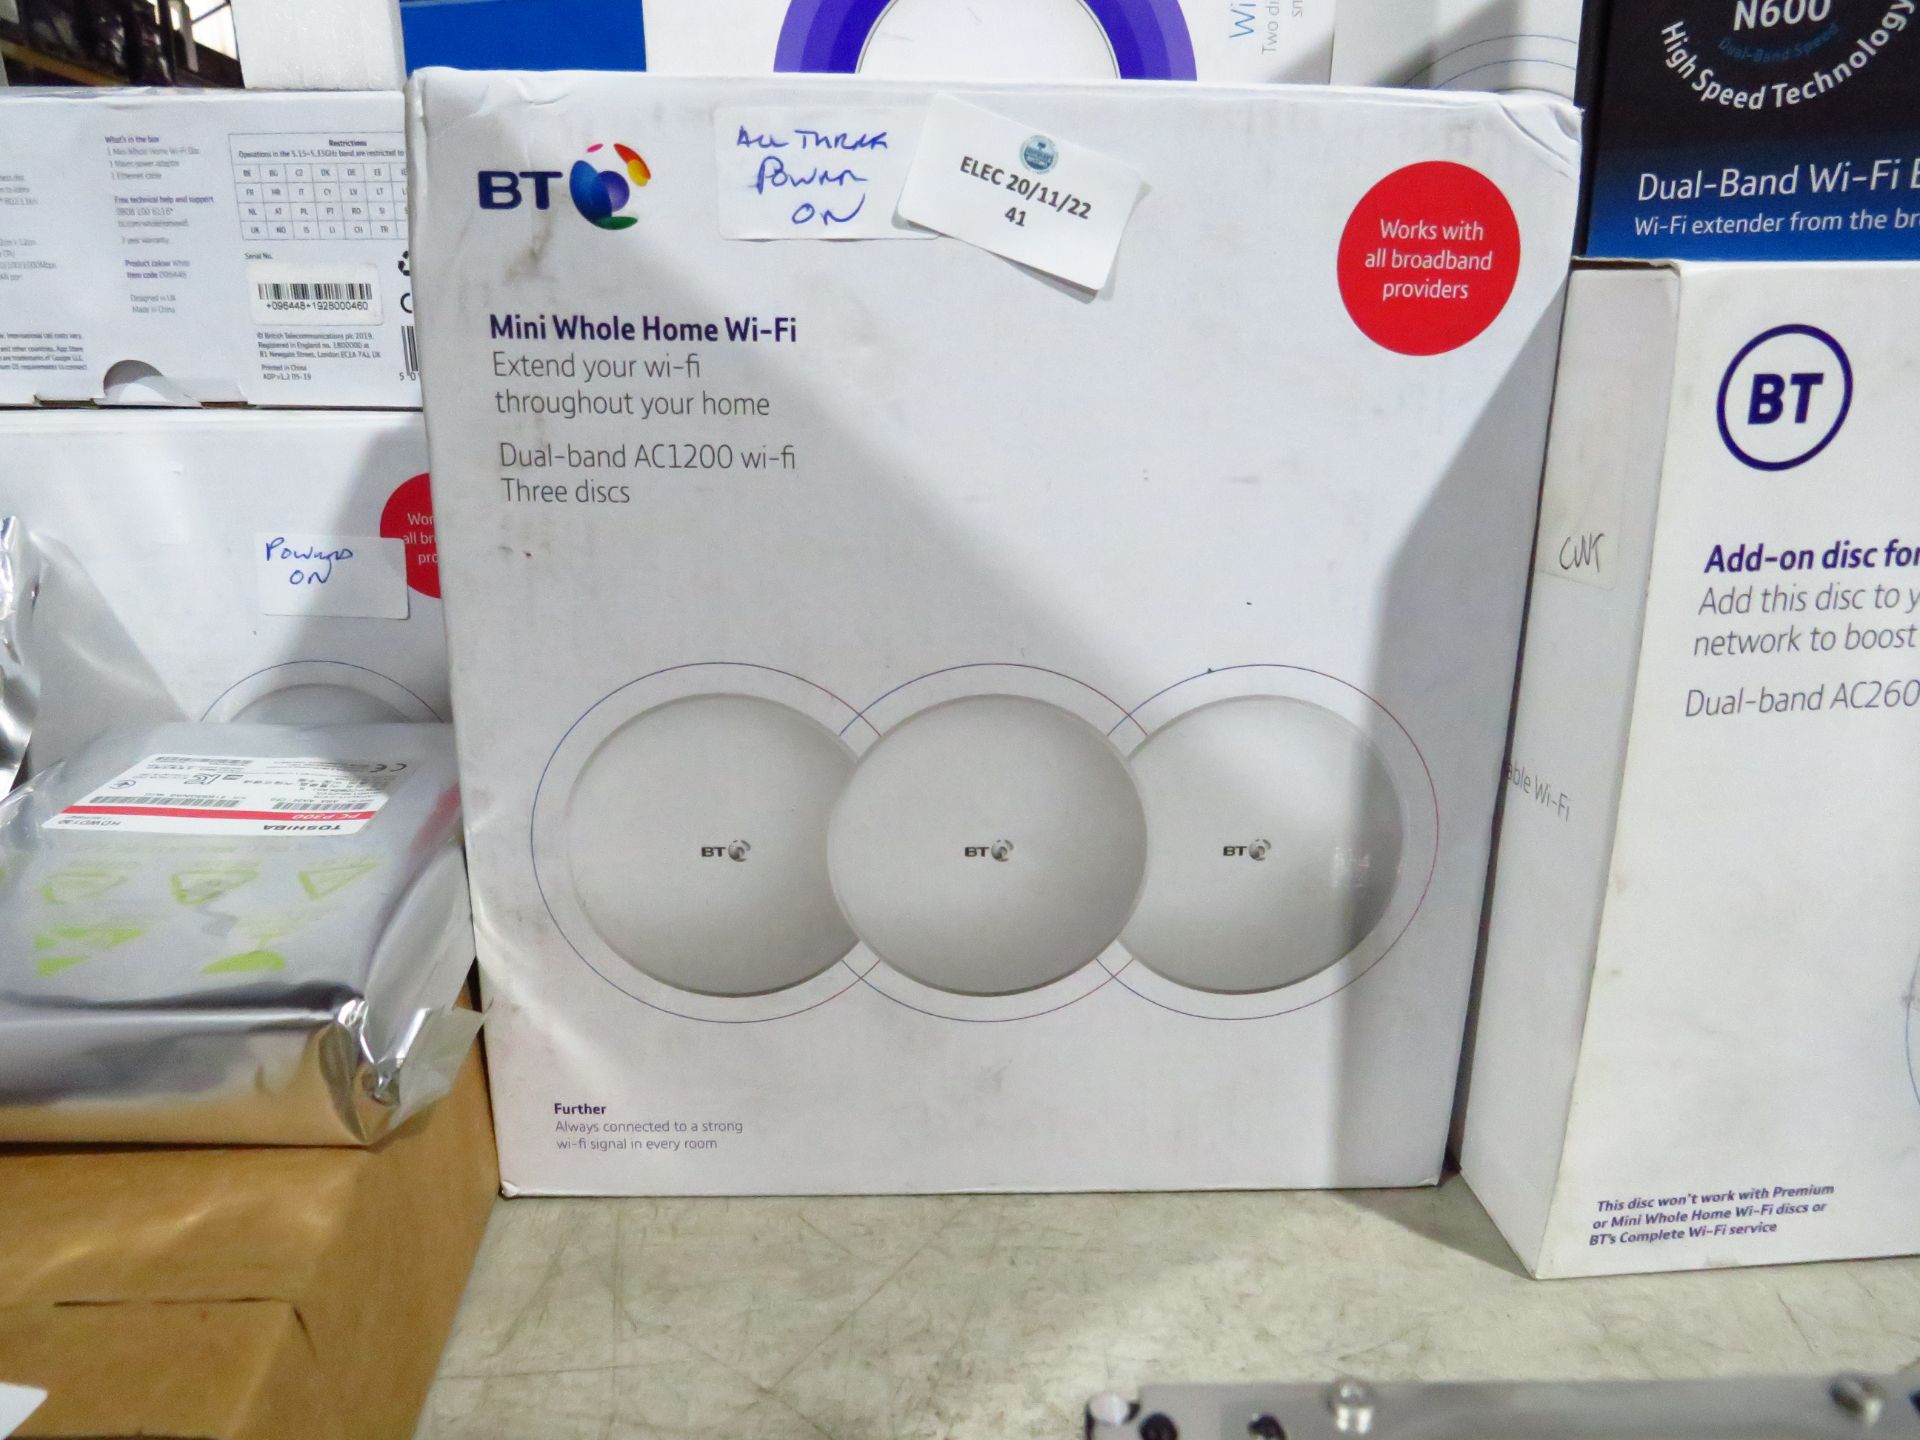 BT Mini Whole Home Wifi 3 disc set, dual band AC1200, the disc power on but we havent tested them